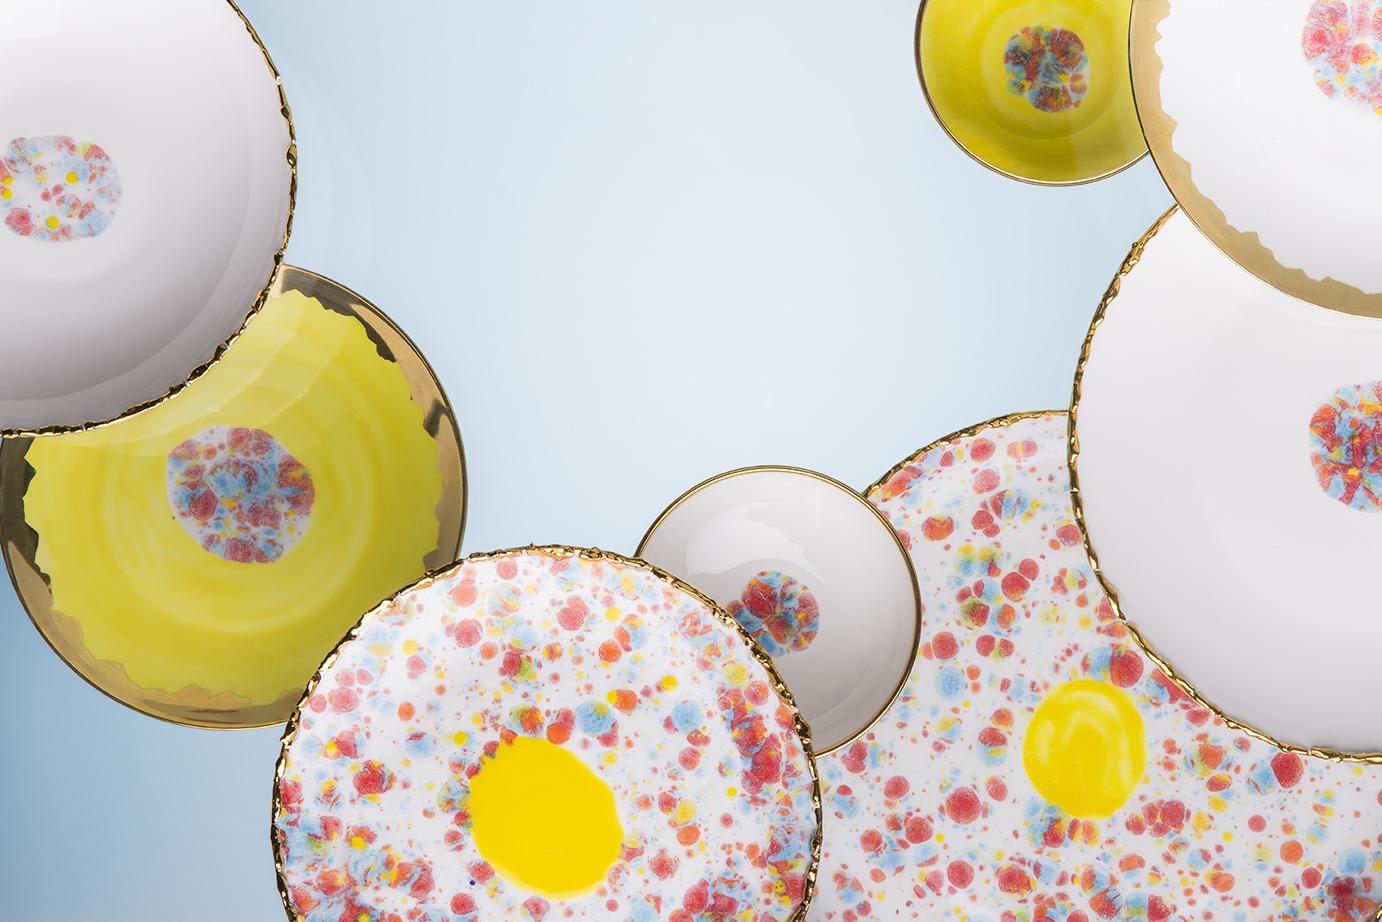 Hand painted in Italy from the finest porcelain, this craquelé edge coupe platter from the Confetti collection has an original golden crackled rim emphasizing the lively multi-color dotted enamel and the yellow decoration at the center.

Craquelé